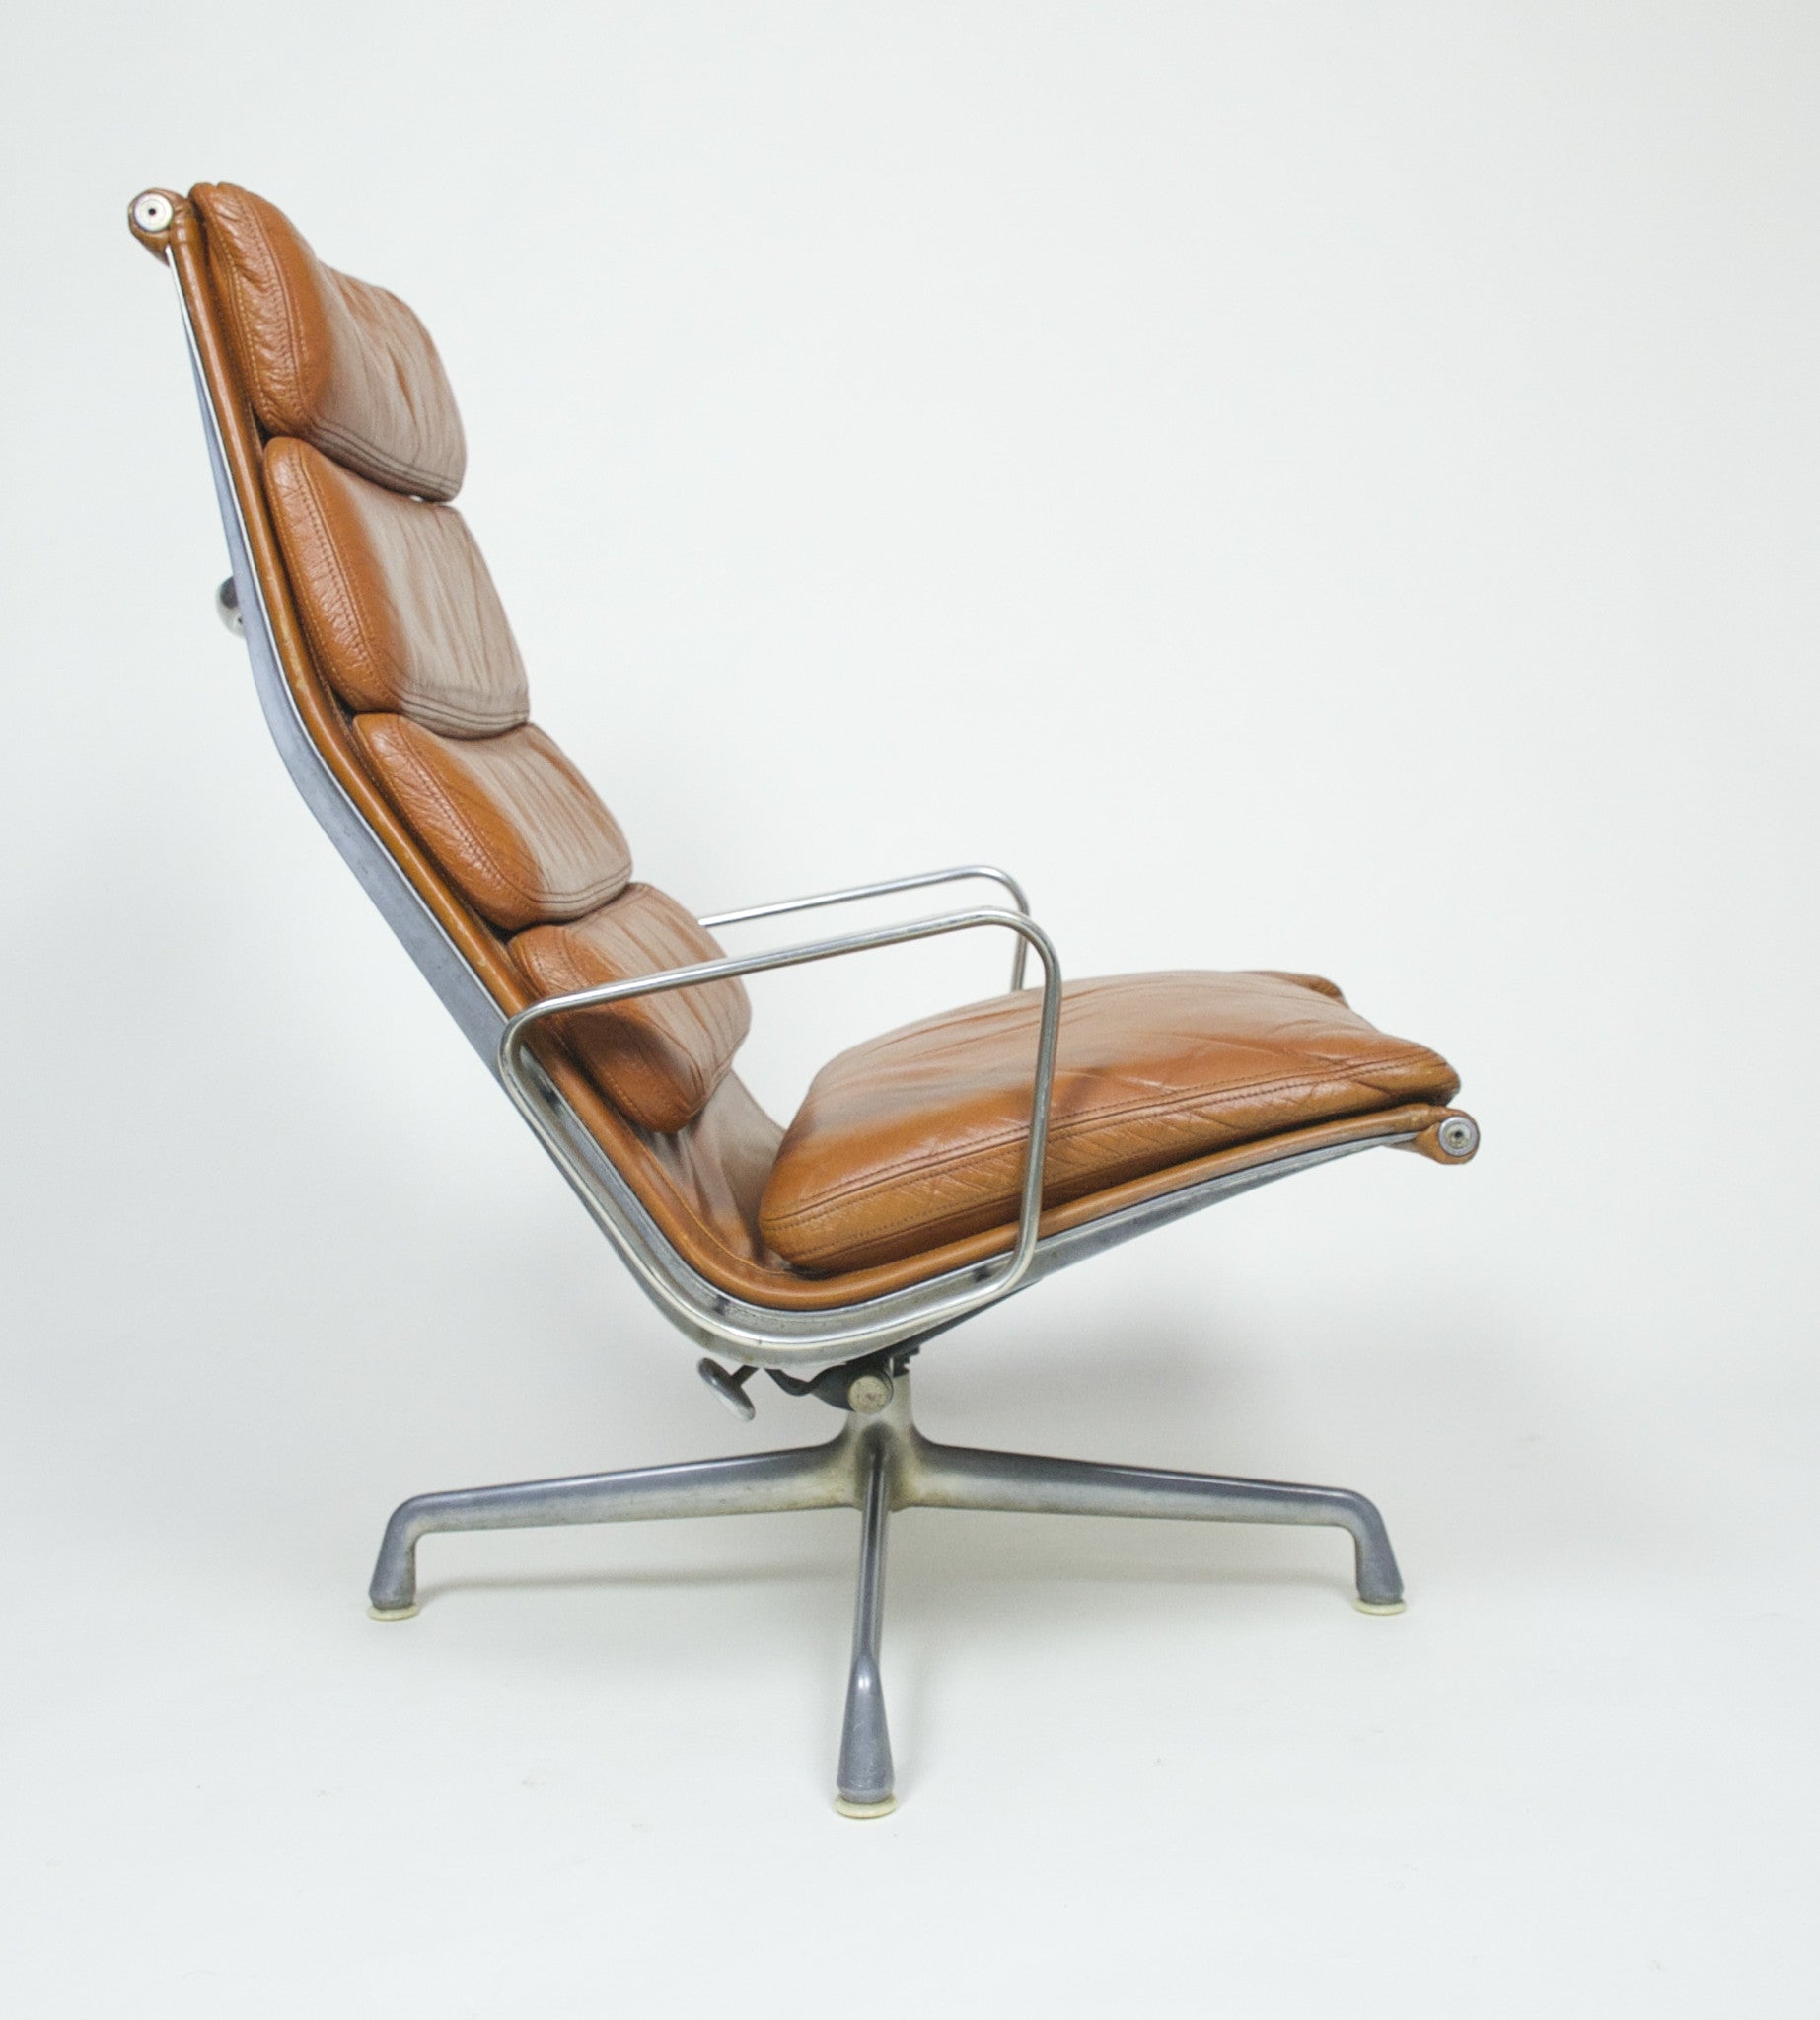 SOLD Eames 1970's Herman Miller Soft Pad Lounge Chair with Ottoman Cognac